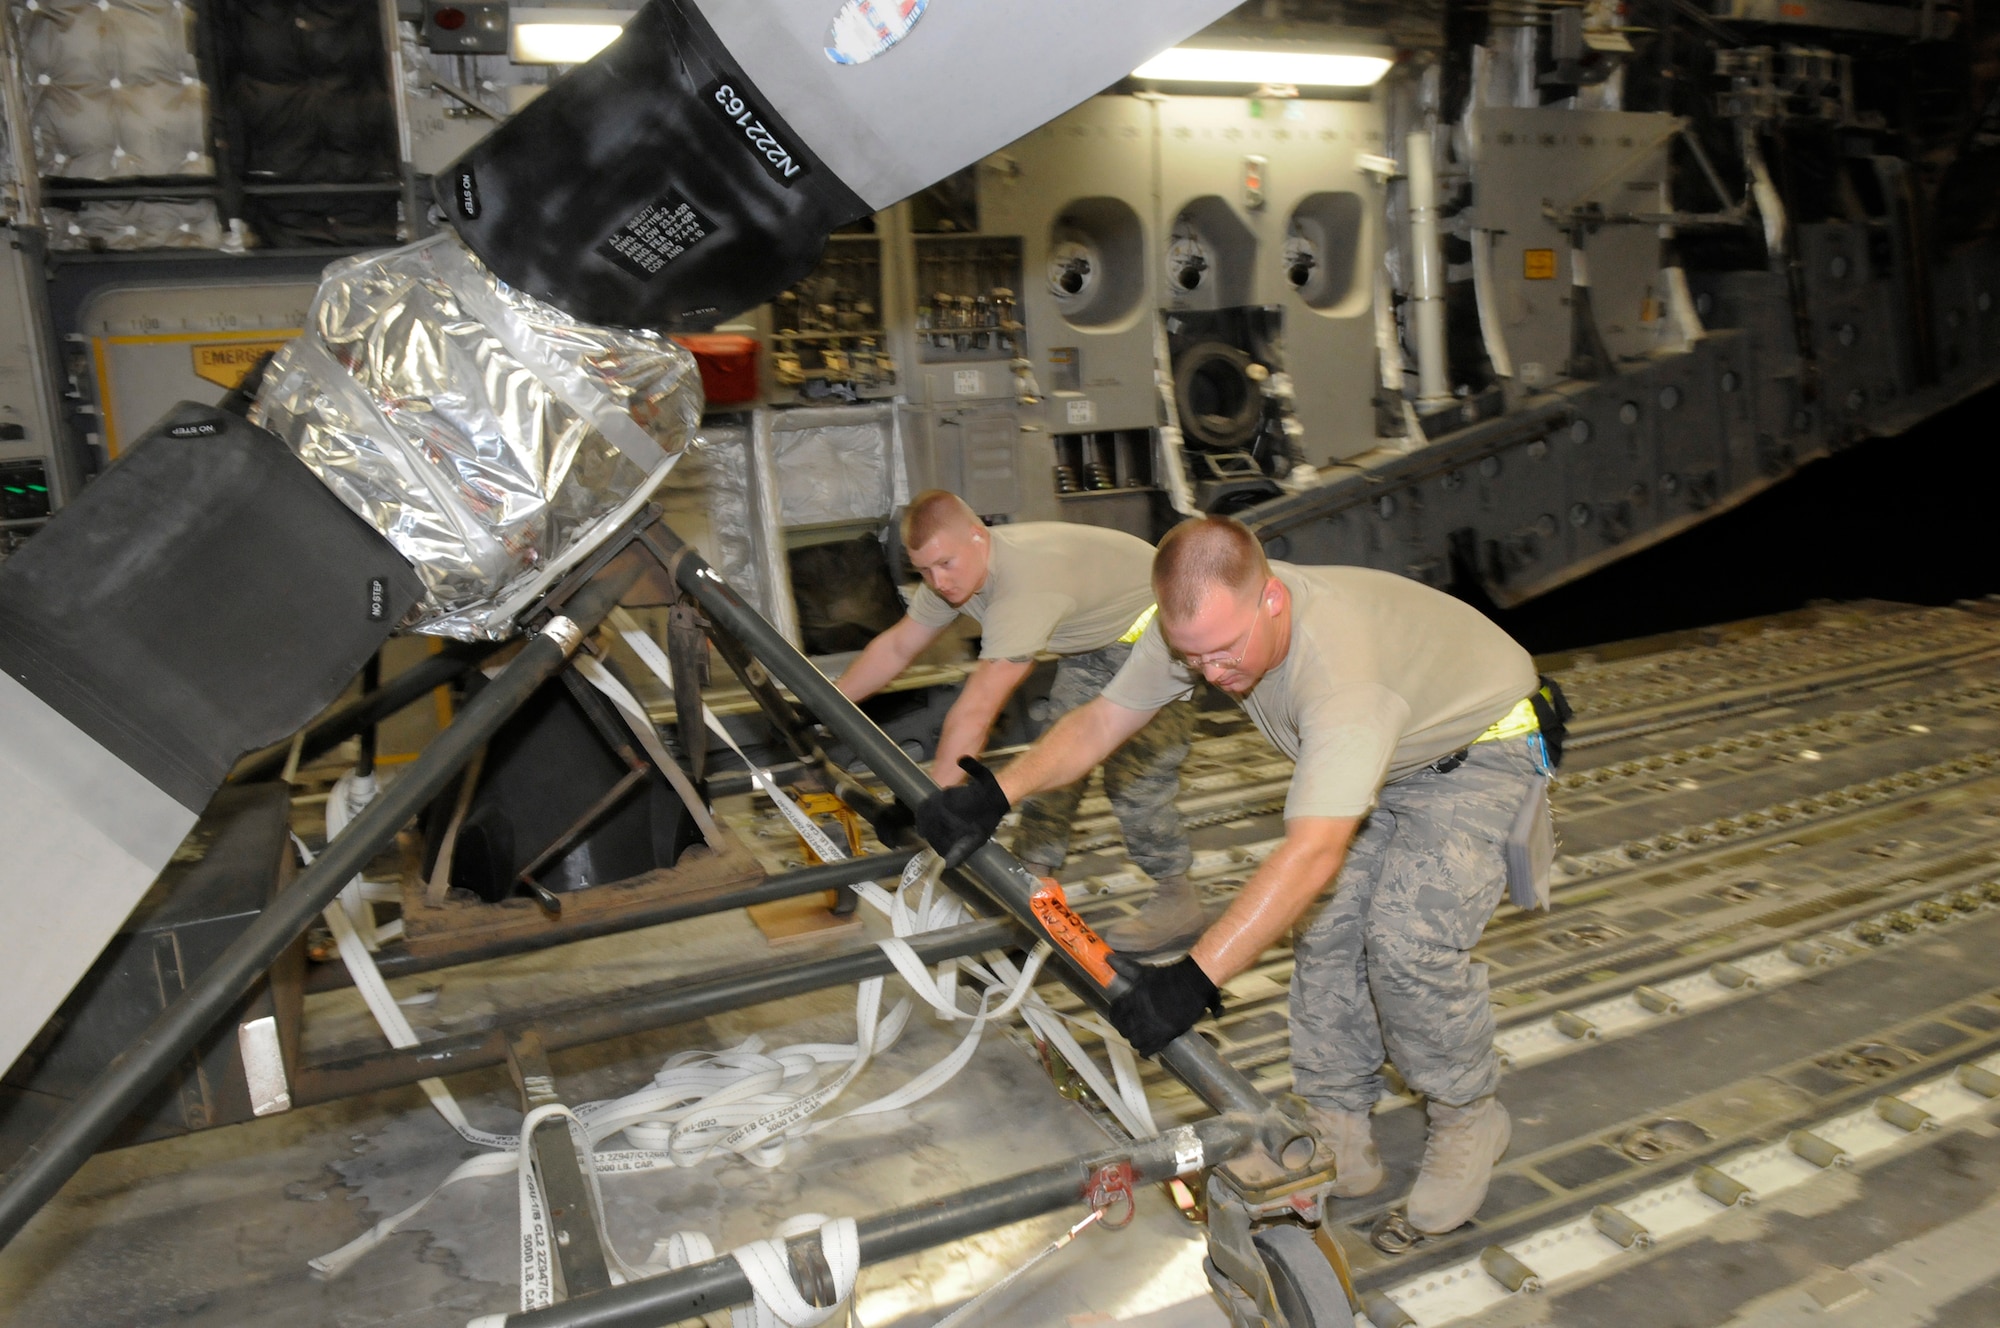 Staff Sgt. Daniel Carter and Senior Airman Joseph Daigneault, air transportation craftsmen assigned to the 8th Expeditionary Air Mobility Squadron, load a C-130 Hercules propeller into a C-17 Globemaster III, October 29, at an undisclosed air base in Southwest Asia.  The C-17 is capable of rapid strategic delivery of troops and all types of cargo to main operating bases or directly to forward bases in the Central Command area of responsibility.  Sergeant Carter hails from Elgin, Ill., and is deployed from Charleston Air Force Base, S.C.  Airman Daigneault, a native Lowell, Mass., is deployed from Little Rock Air Force Base, Ark.  Both are here in support of Operations Iraqi and Enduring Freedom and Joint Task Force-Horn of Africa.  (U.S. Air Force photo by Tech. Sgt. Michael Boquette/Released)